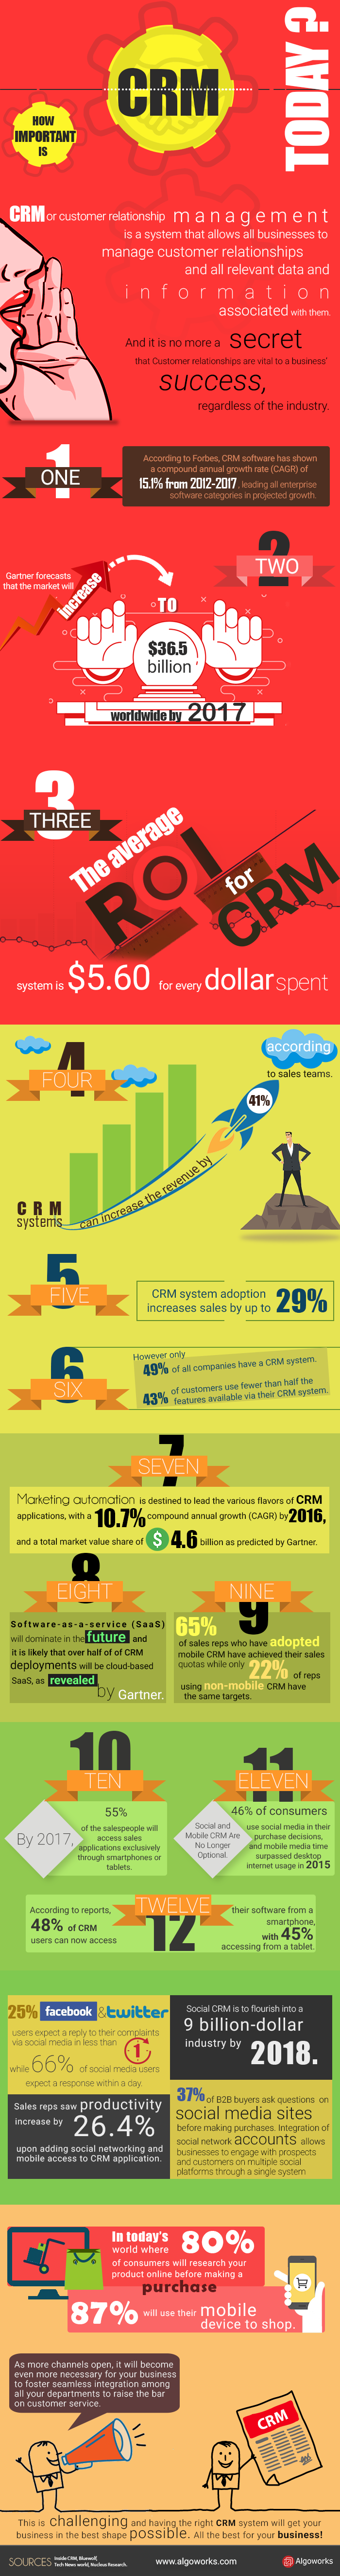 How Important Is CRM Today? | An Infographic